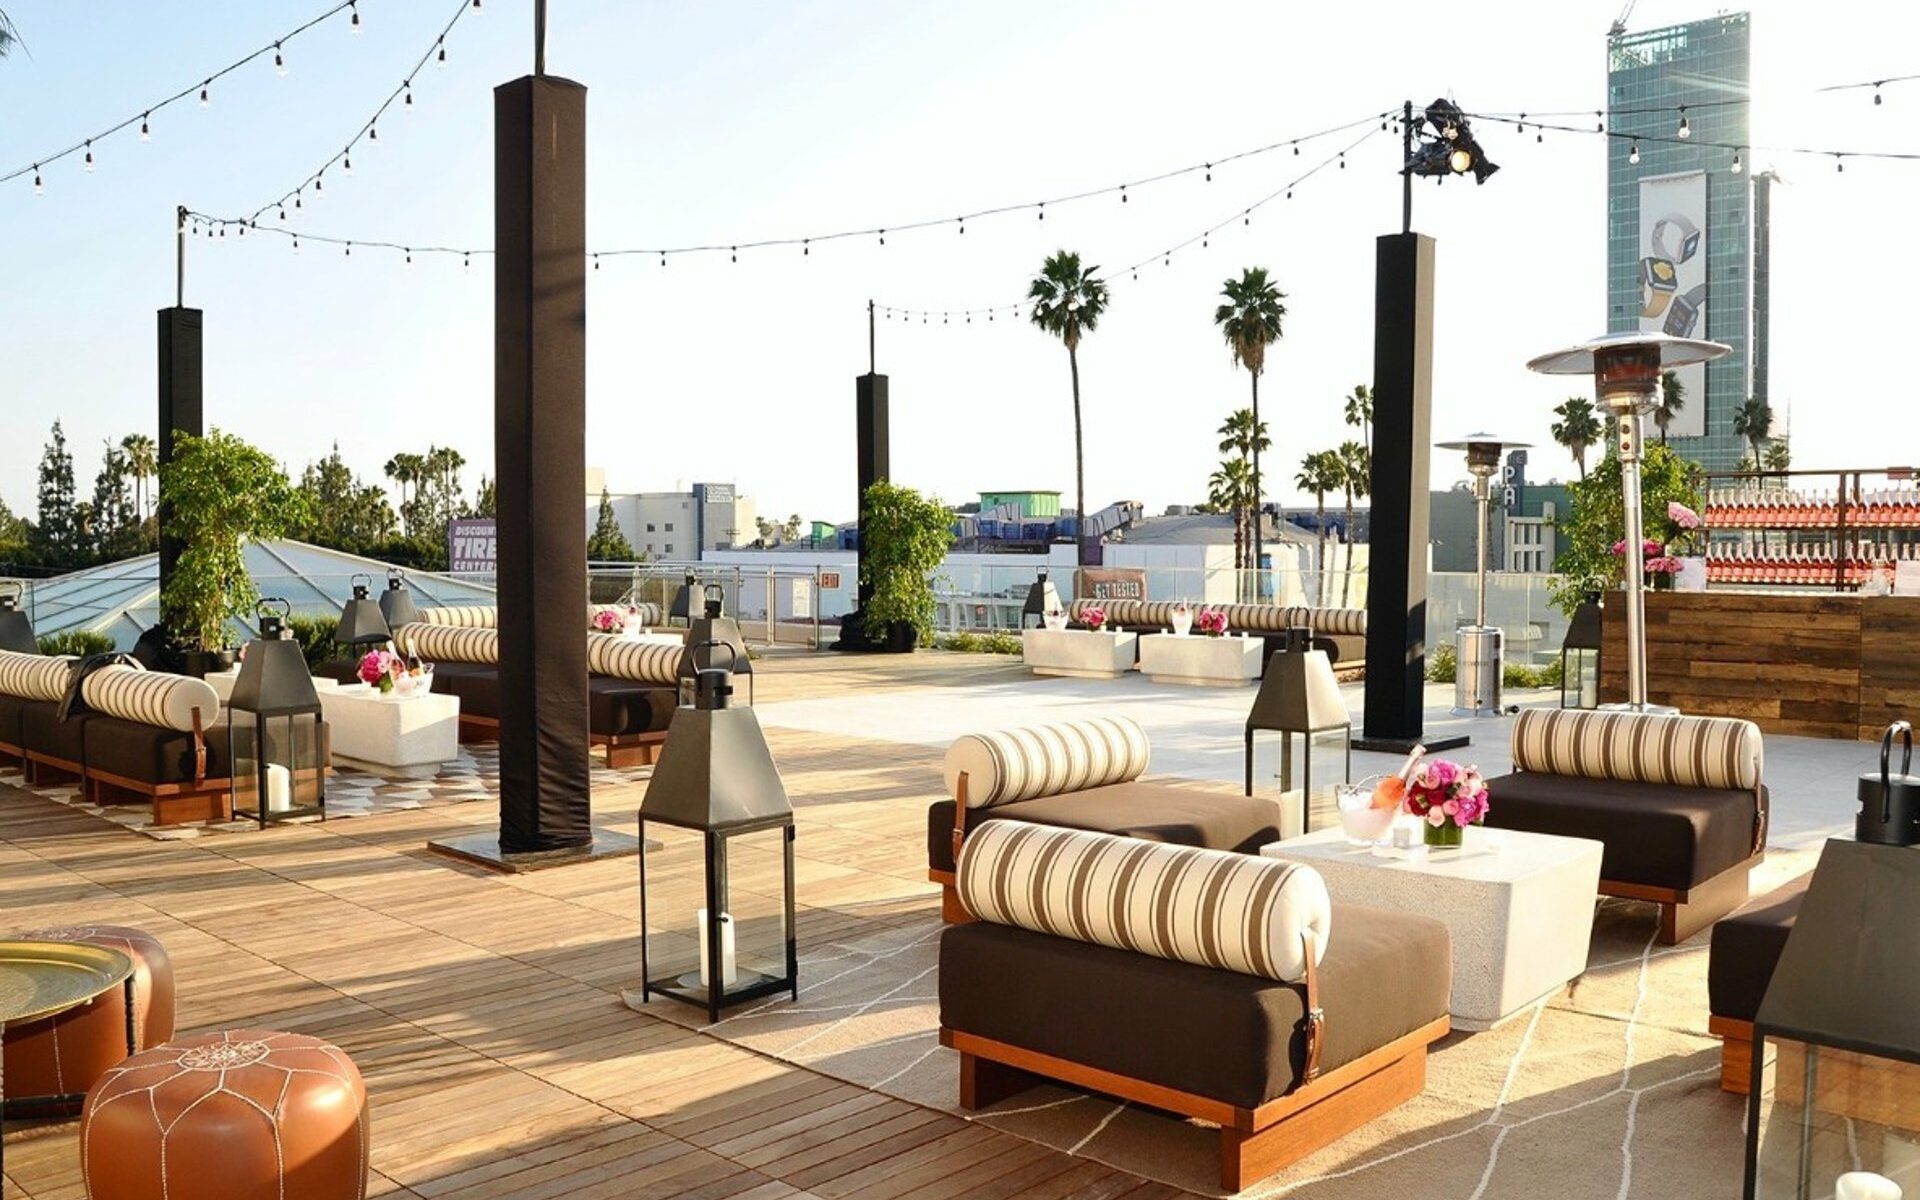 NeuHouse Los Angeles outdoor venue space with a bar 